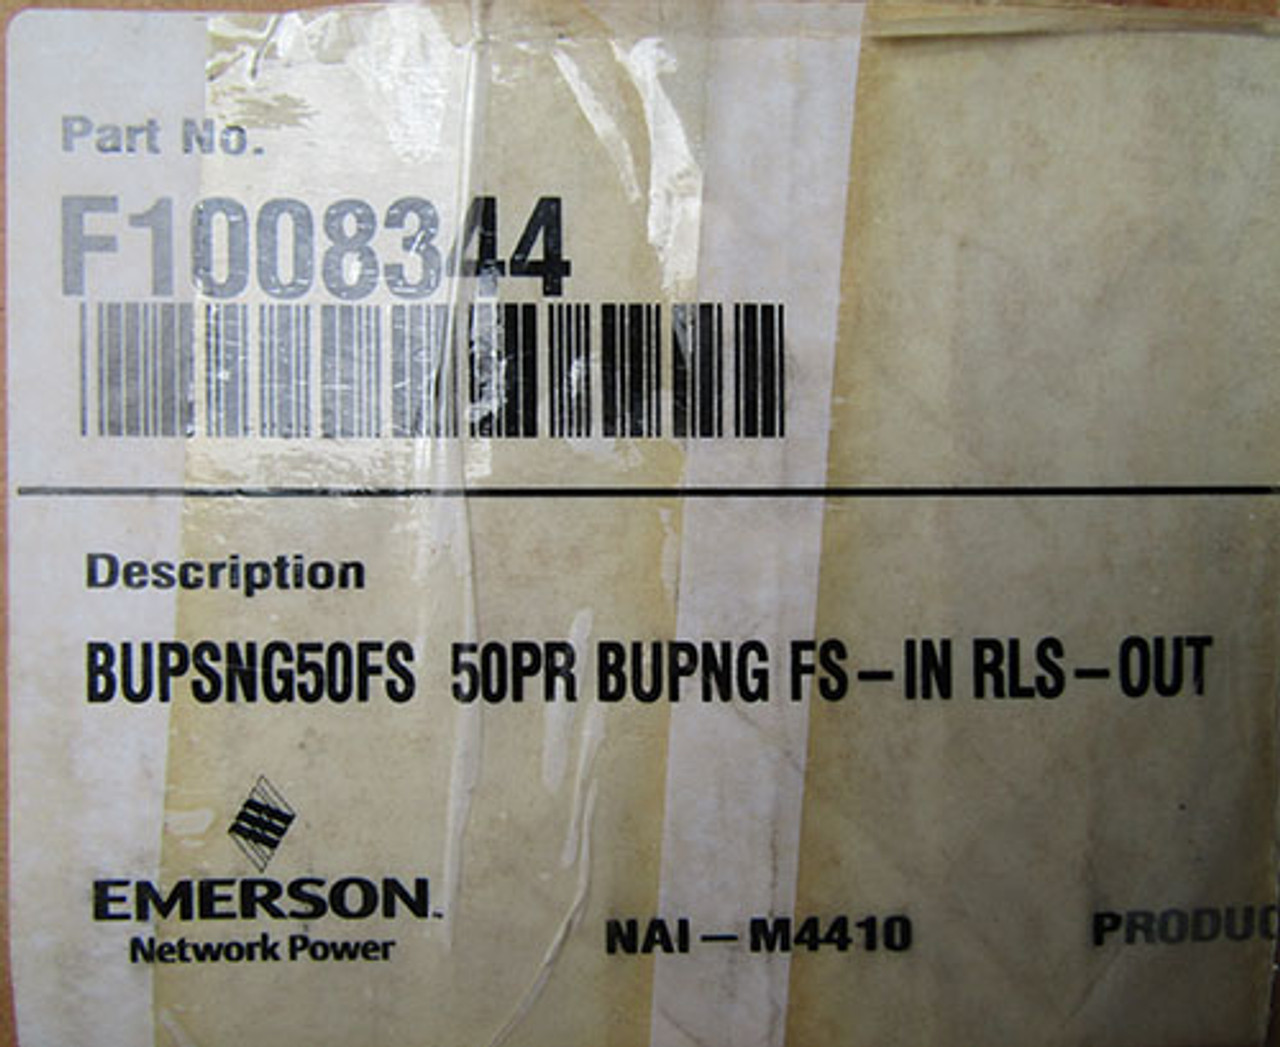 Emerson BUPSNG50FS 50PR BUPNG FS-IN RLS-OUT F1008344 - New Surplus